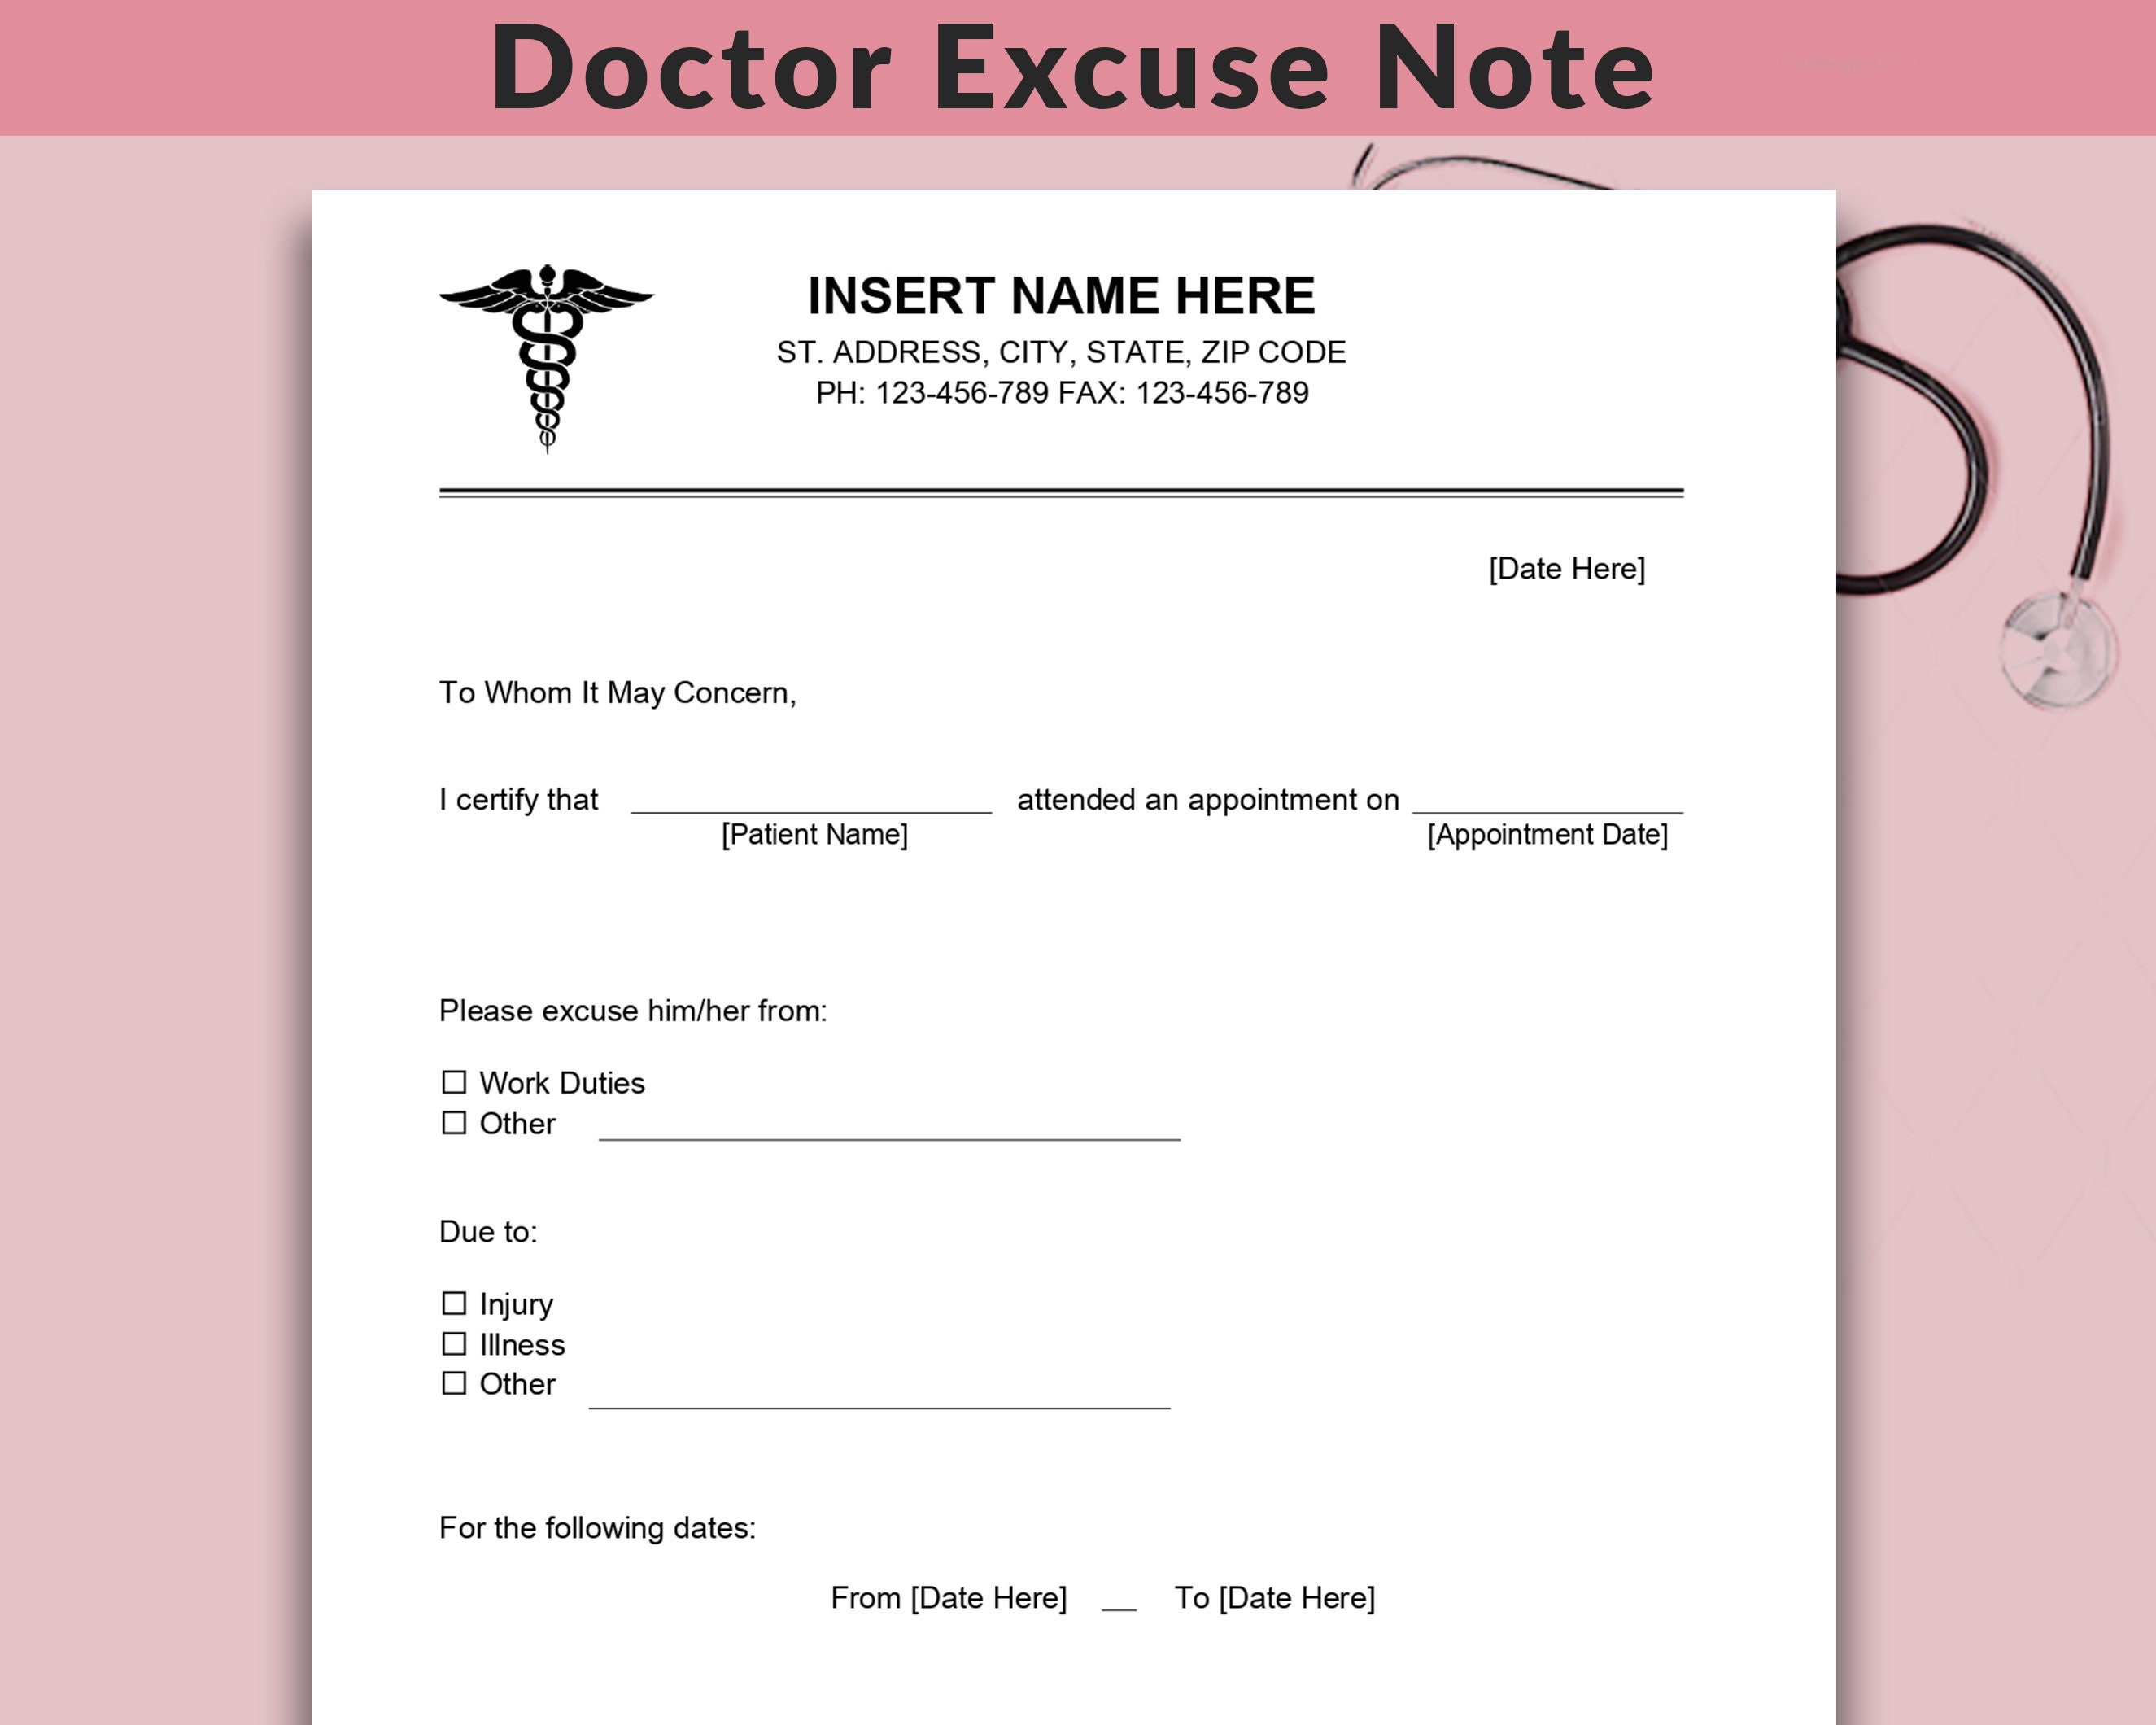 fillable-doctors-note-for-work-doctor-excuse-note-drs-note-etsy-denmark